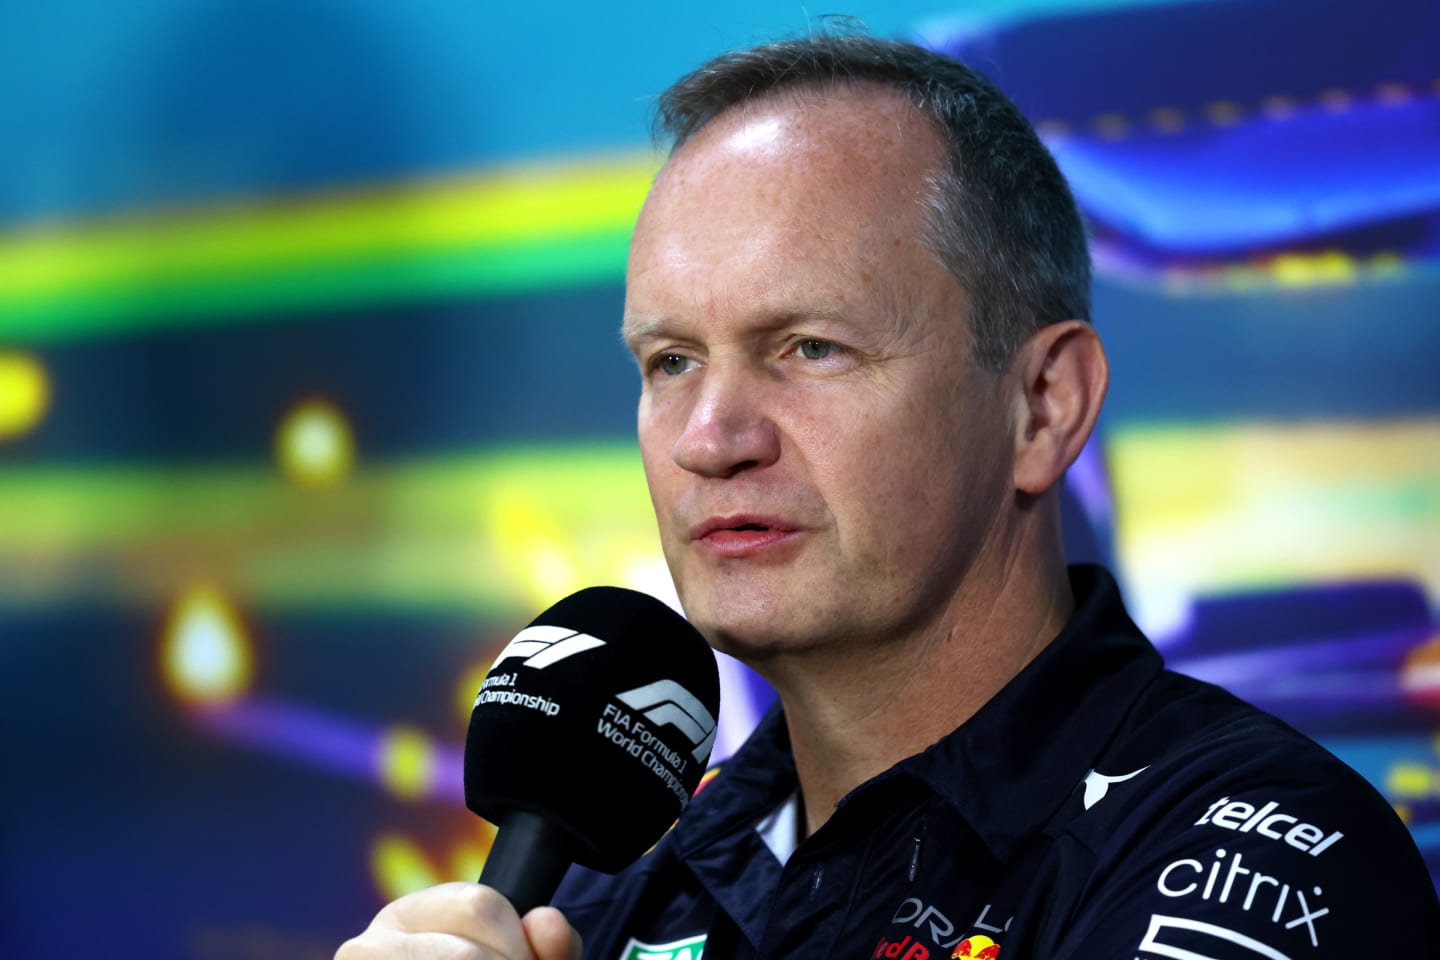 SAO PAULO, BRAZIL - NOVEMBER 12: Red Bull Racing Head of Car Engineering Paul Monaghan attends a press conference prior to practice ahead of the F1 Grand Prix of Brazil at Autodromo Jose Carlos Pace on November 12, 2022 in Sao Paulo, Brazil. (Photo by Bryn Lennon/Getty Images)